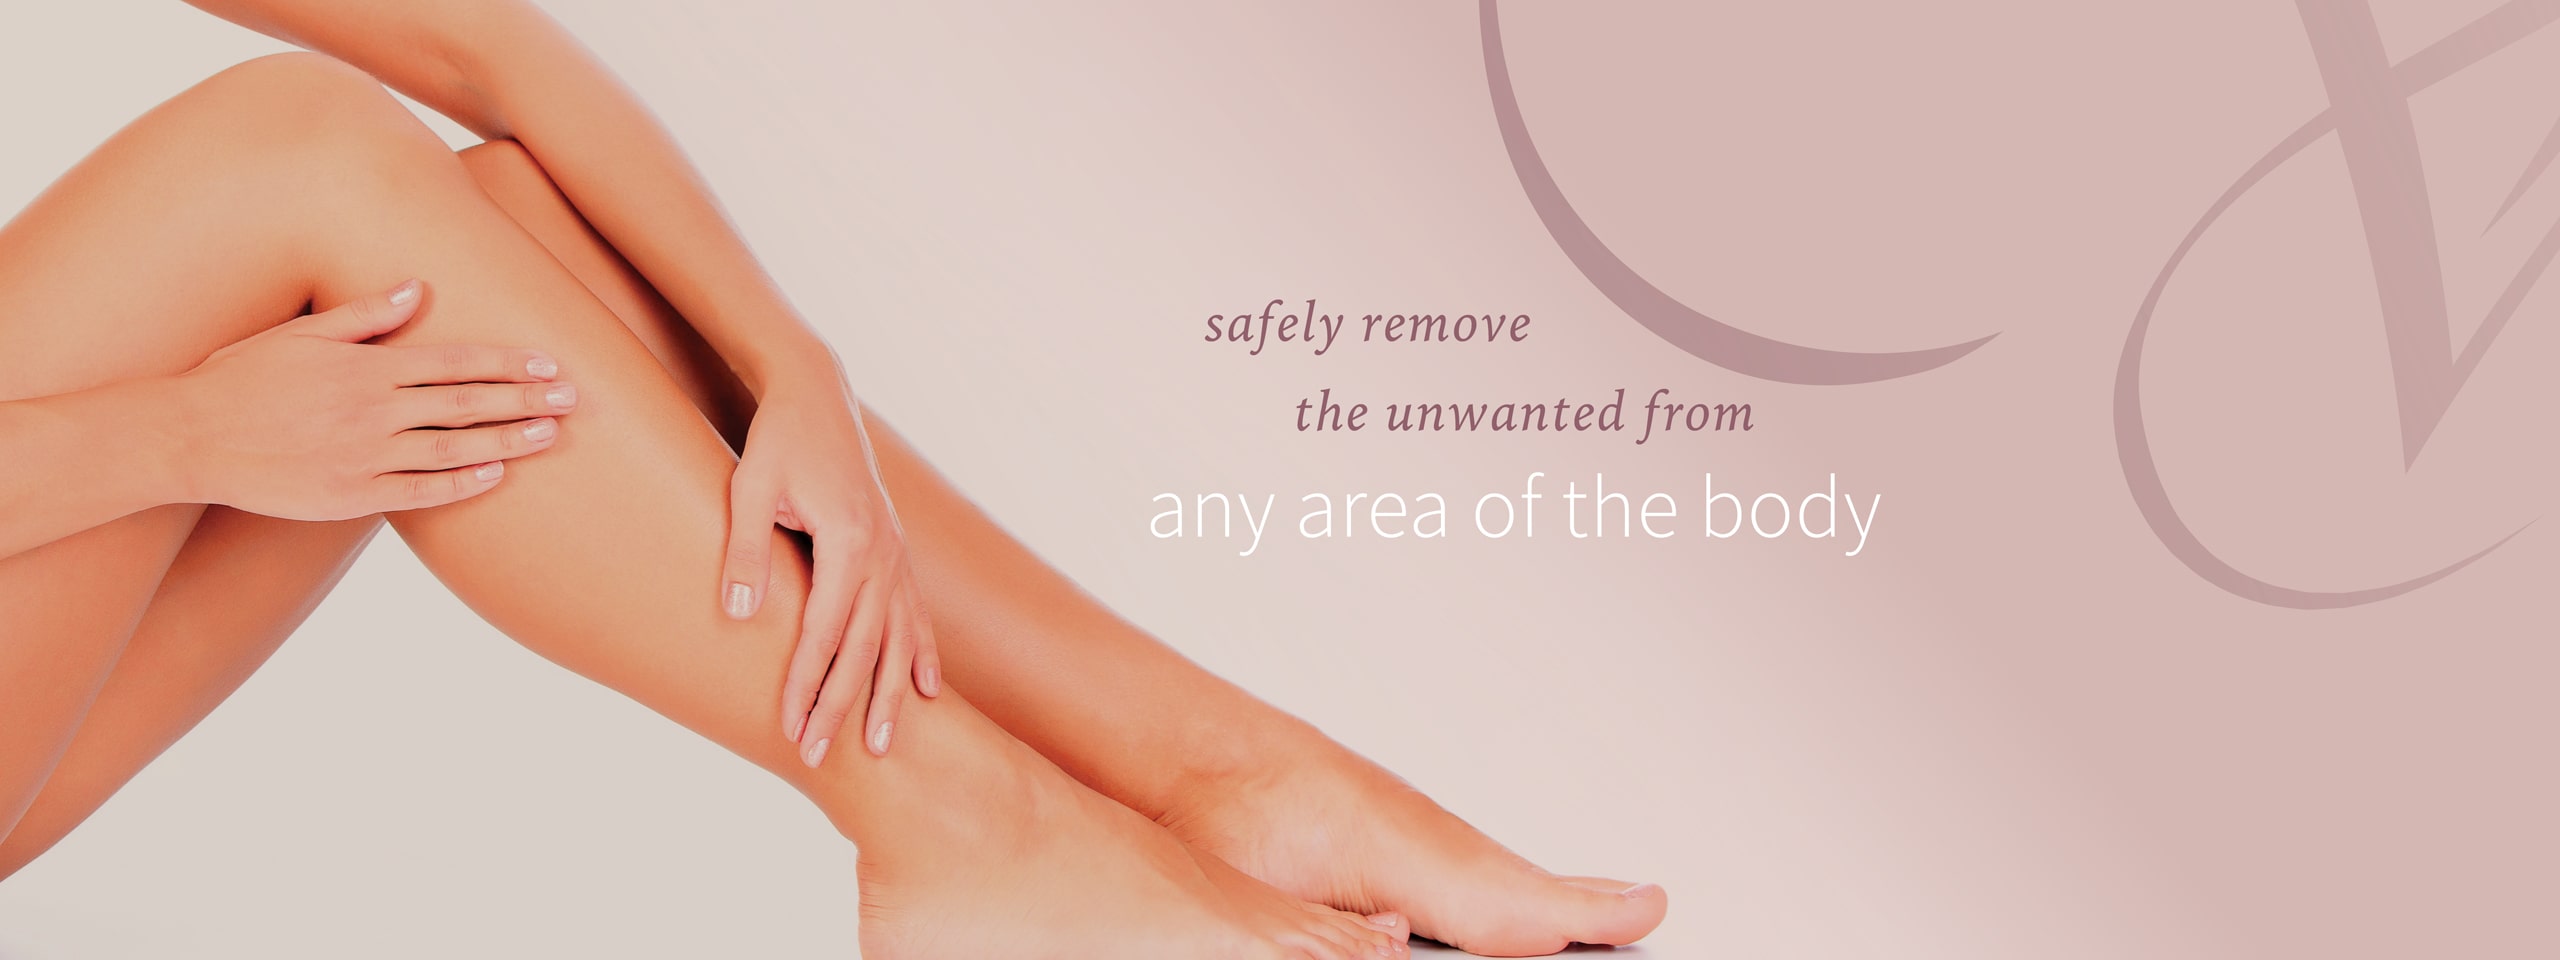 Vitality Antiaging Center Laser Hair and Tattoo Removal